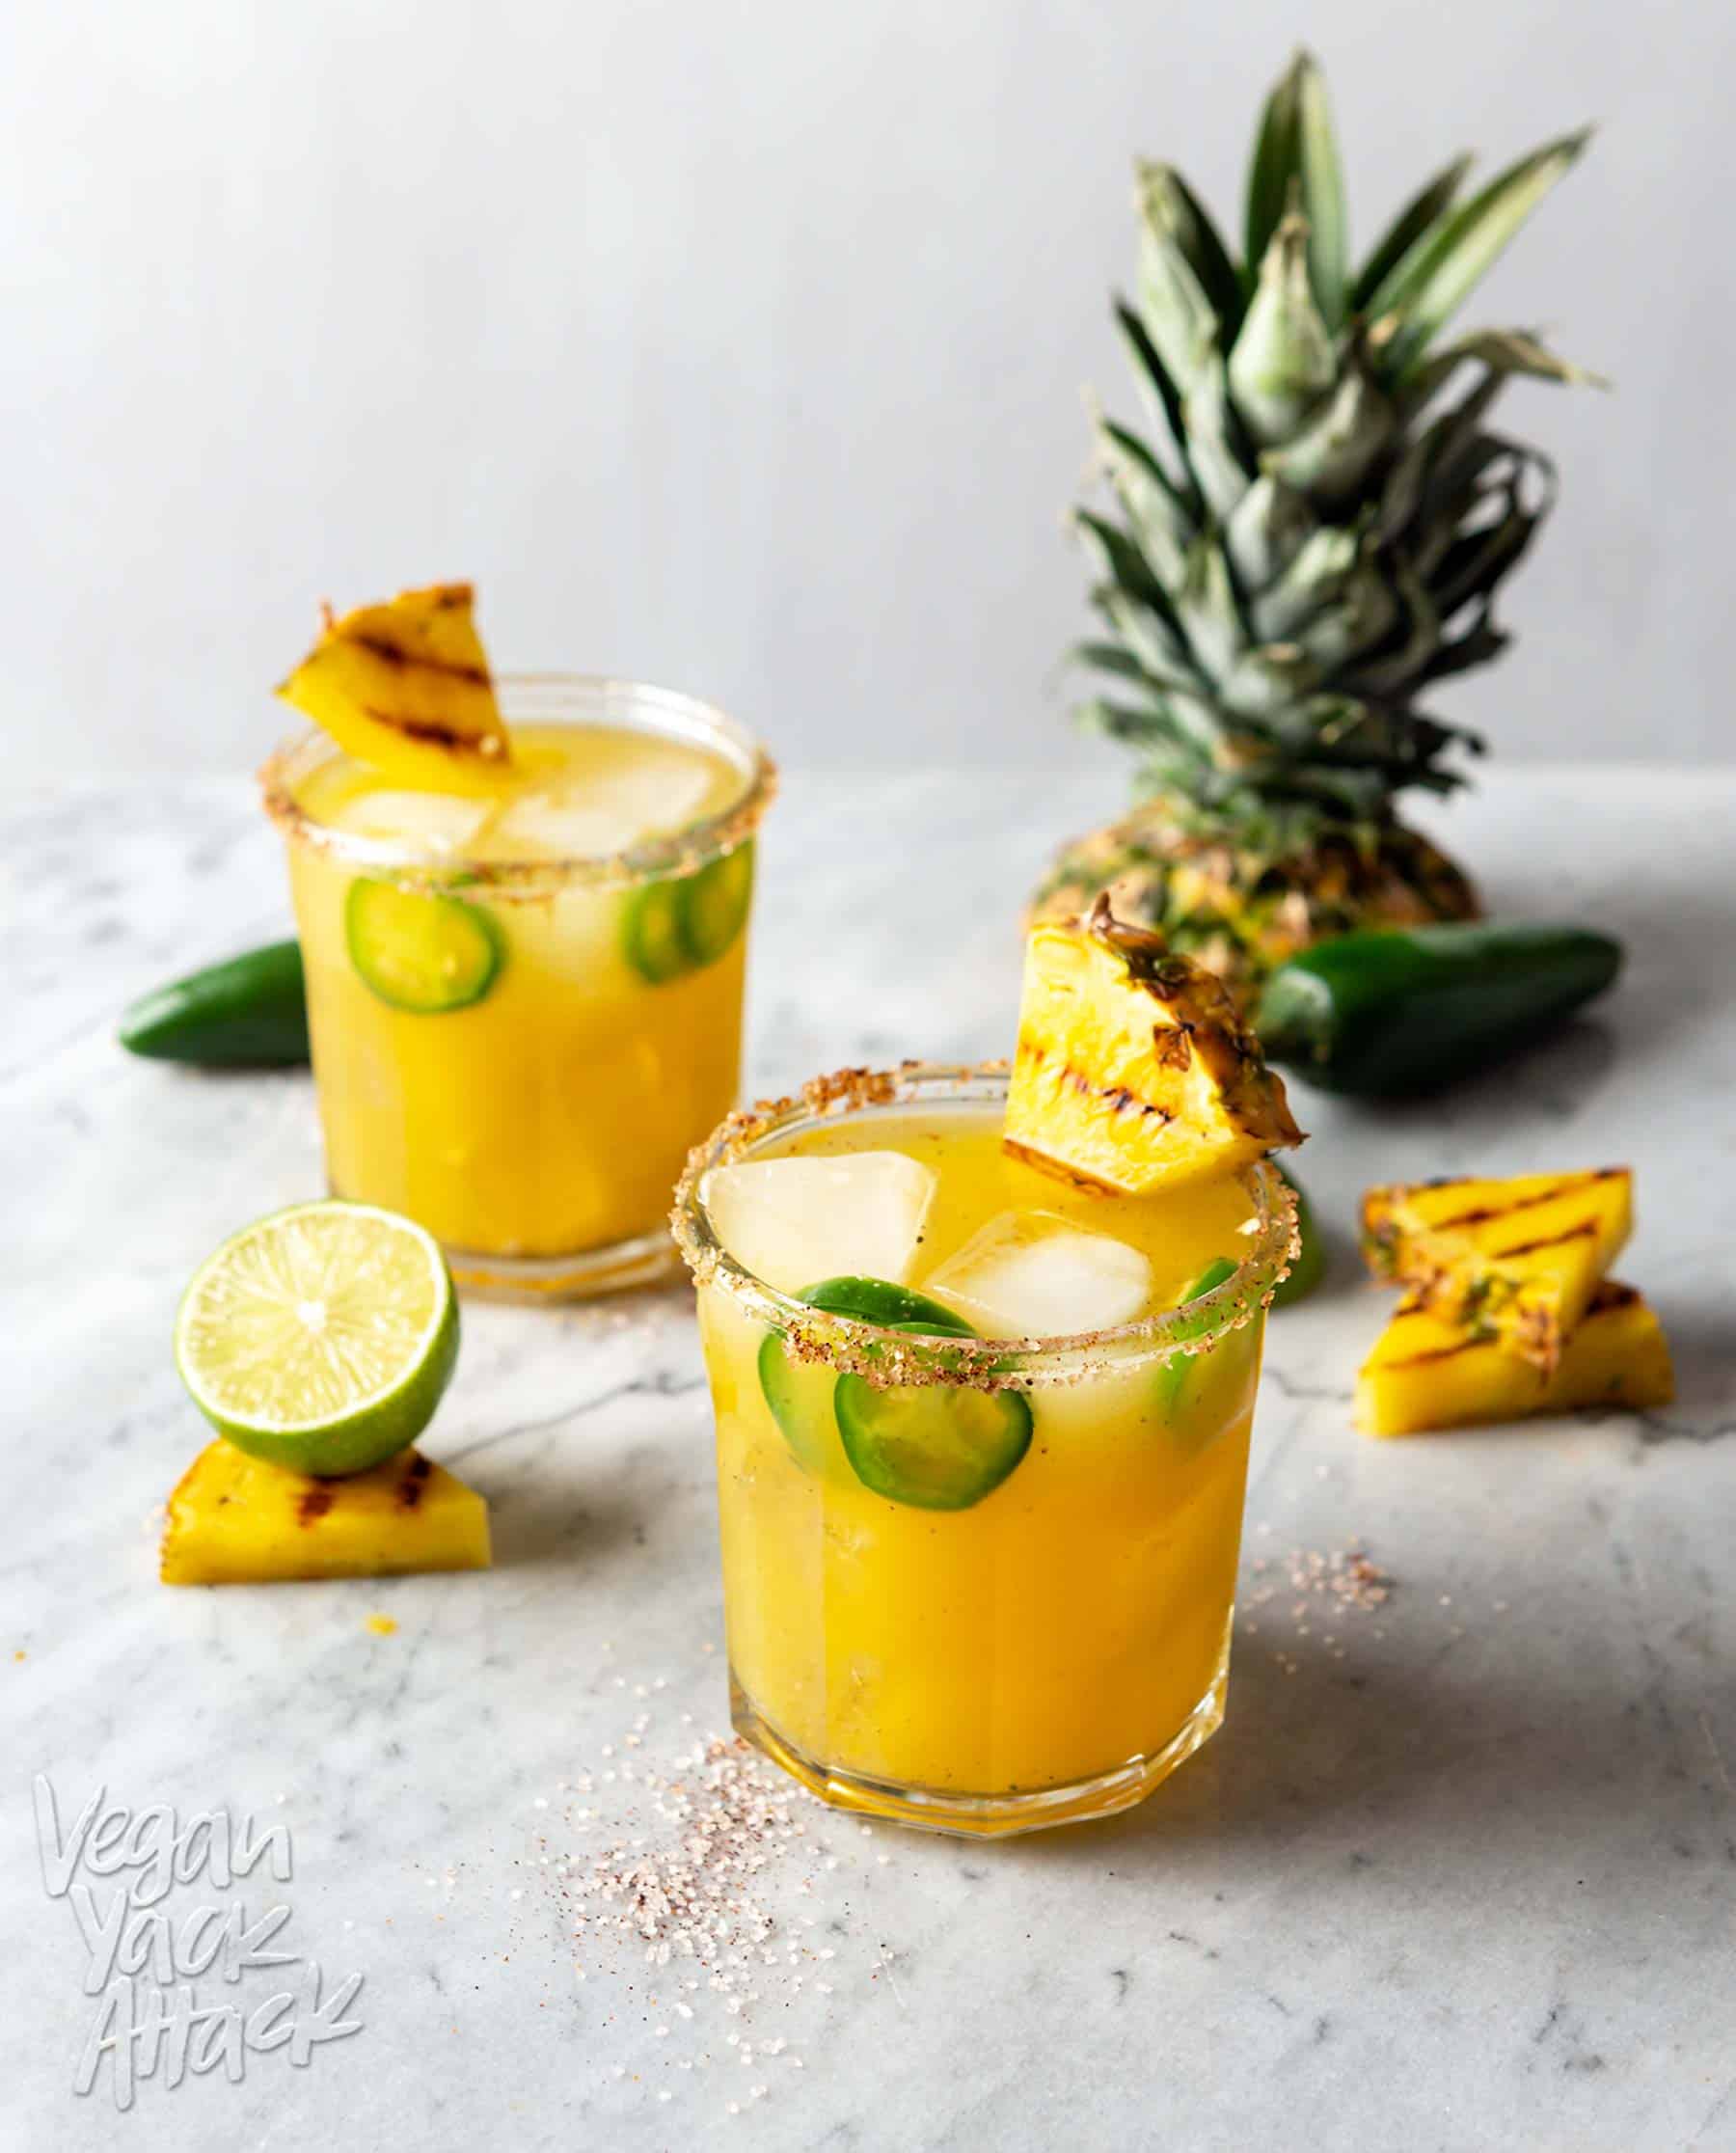 These Charred Pineapple Jalapeño Margaritas are better than any of their predecessors and unique in their own way! Try out this recipe to cool down, while also bringing the heat. #cocktails #margaritas #pineapple #recipe #jalapeno